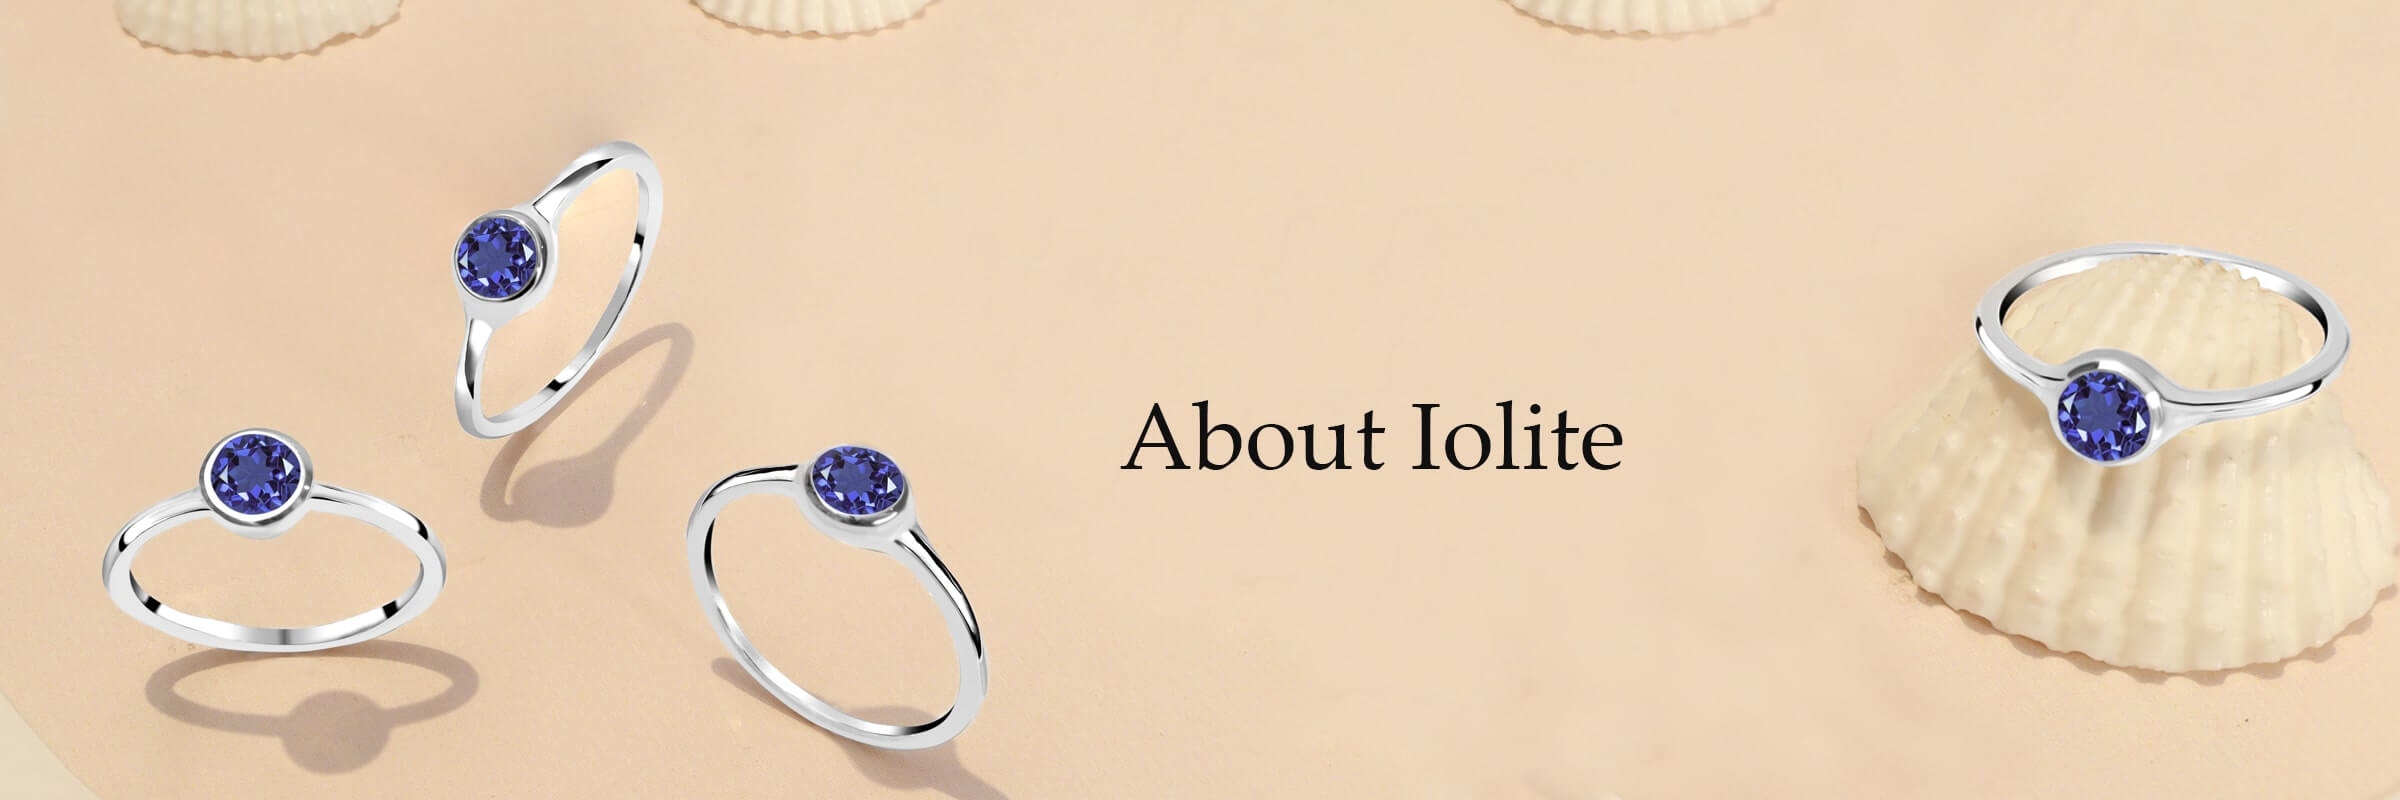 About Iolite 